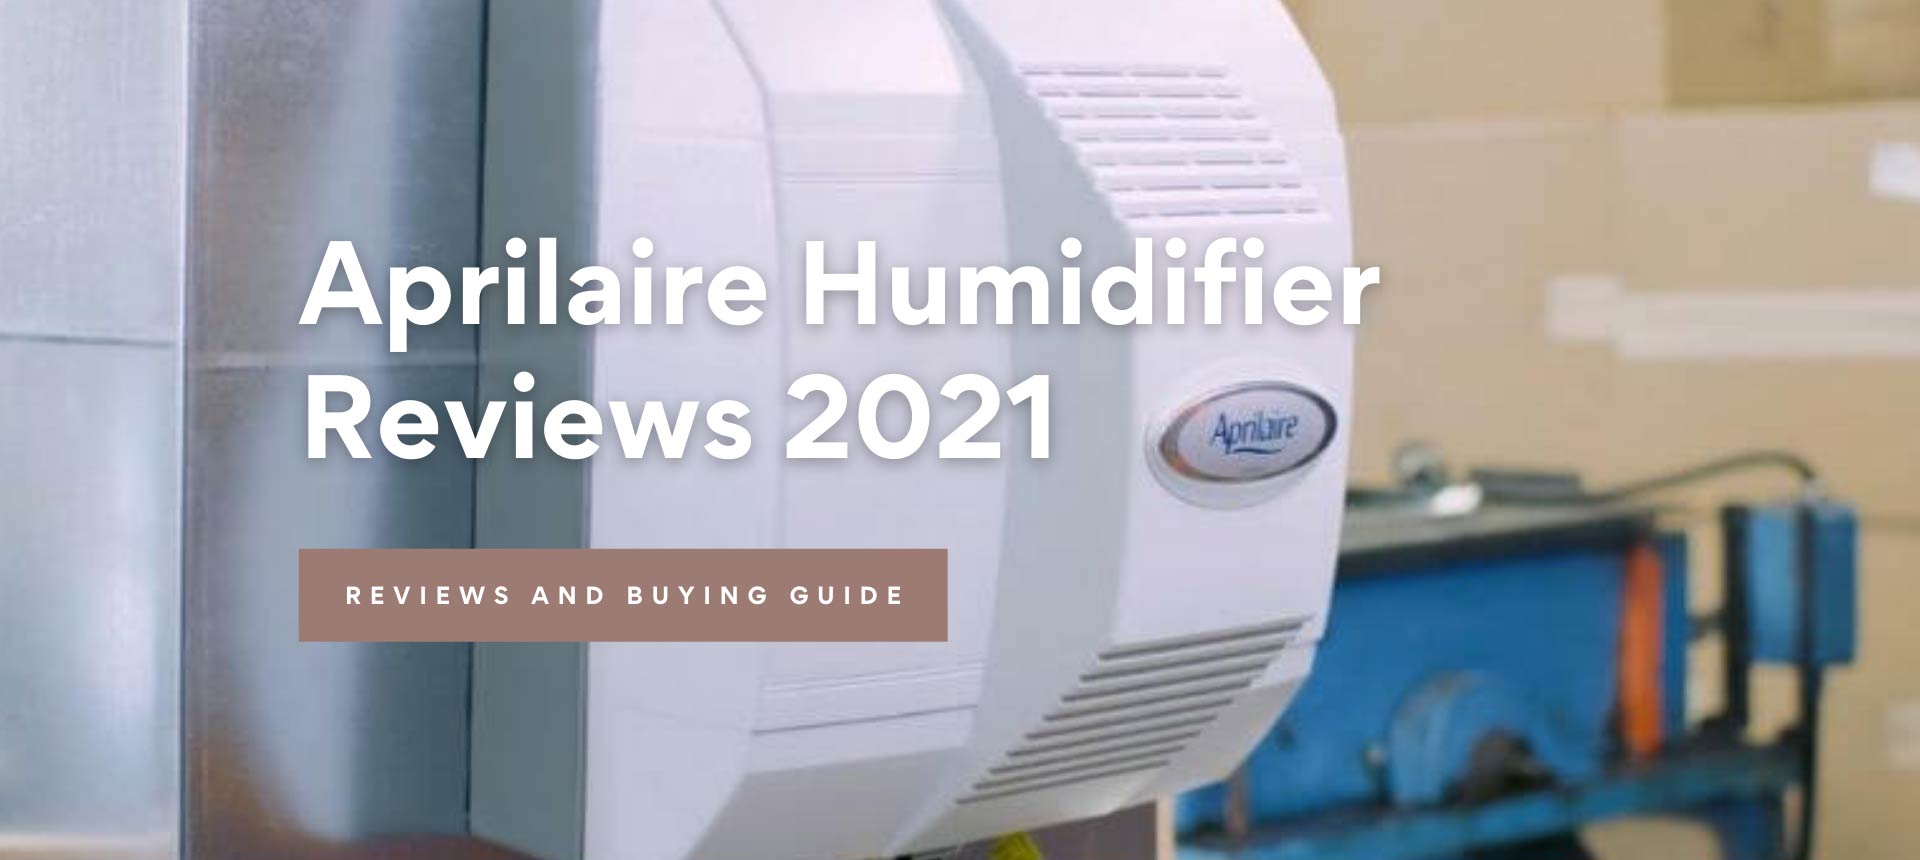 Aprilaire Humidifier Reviews 2021